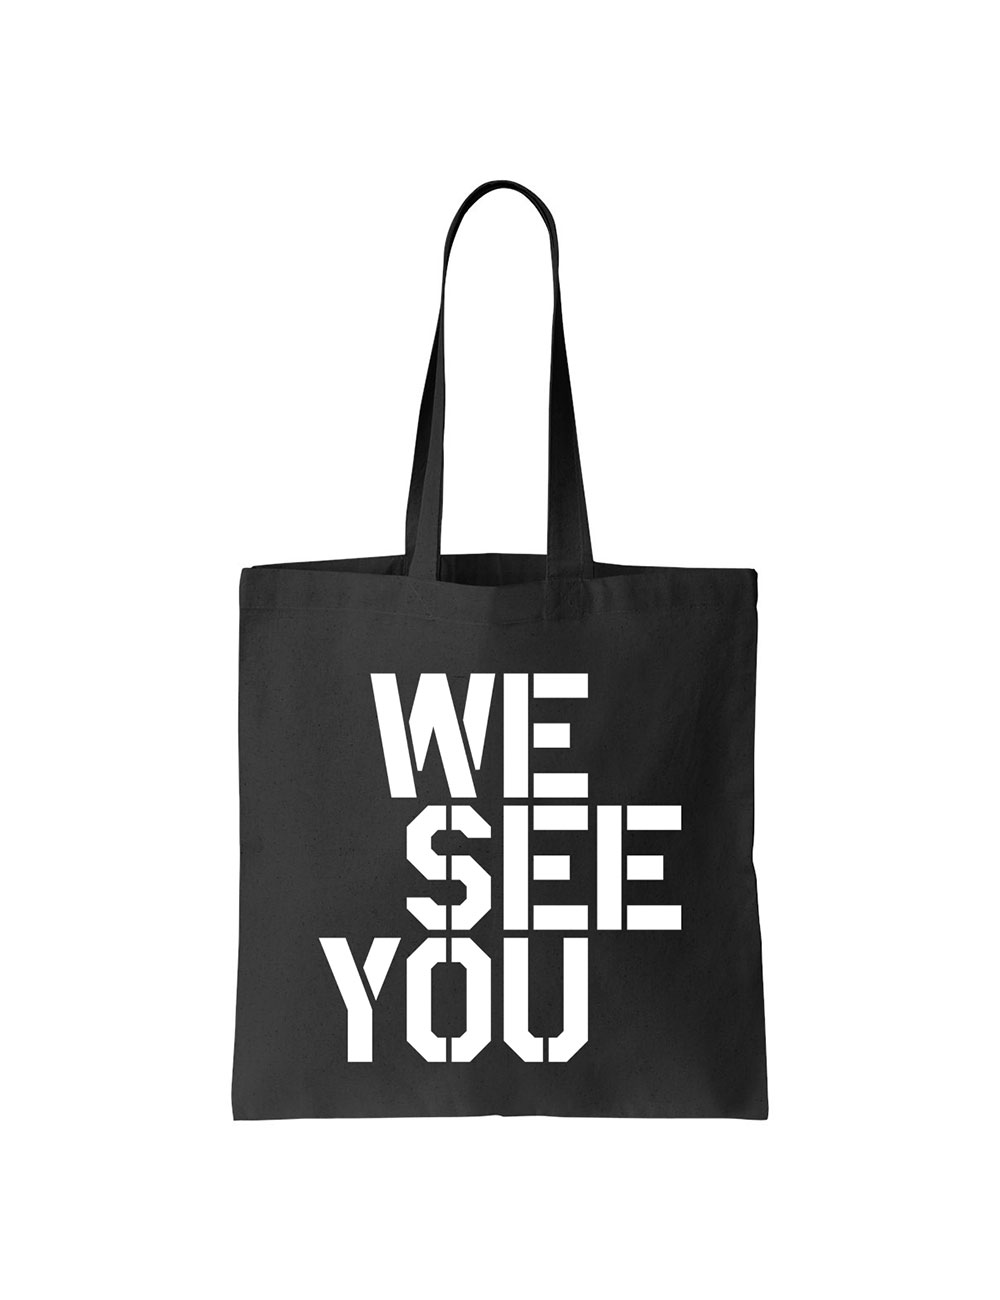 Afropunk - Official Merch Shop - T-Shirts - We See You Tote Front